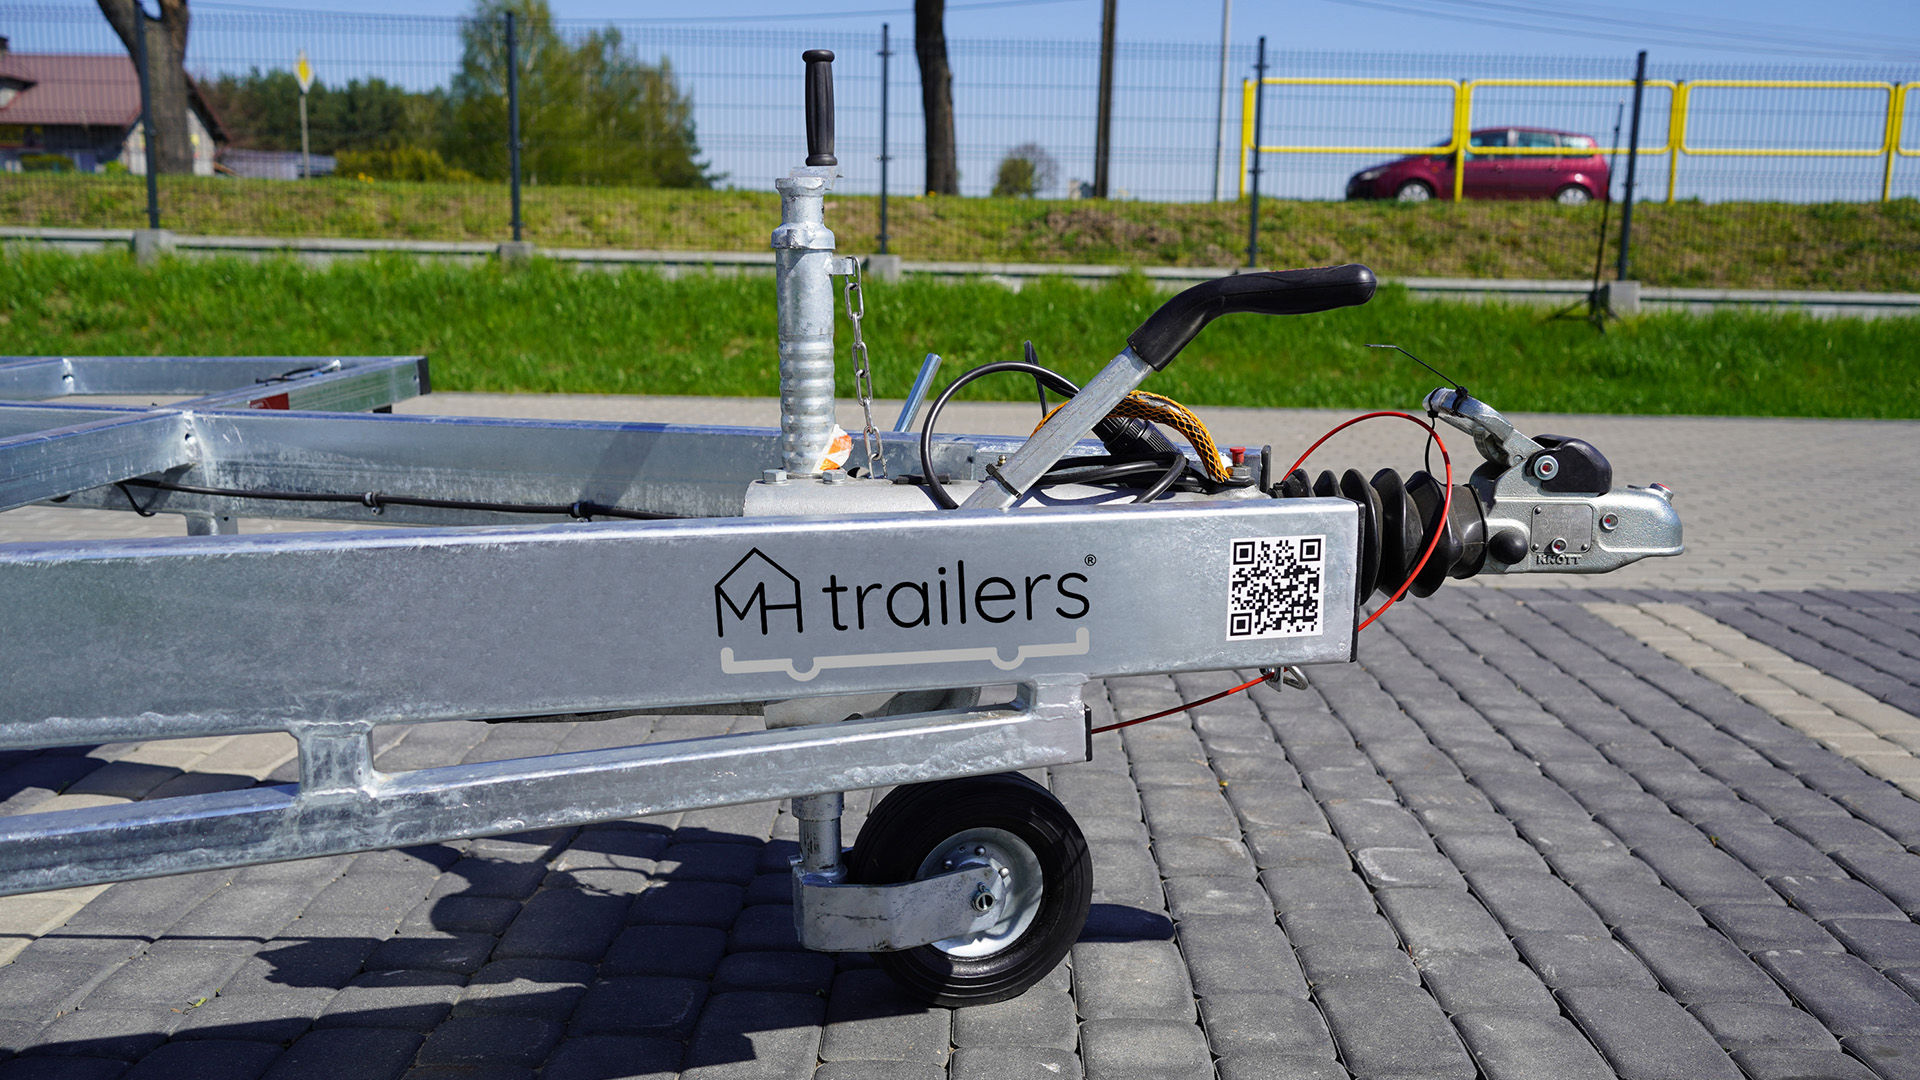 OFFICIAL MANUFACTURER OF MOBI HOUSE TRAILERS